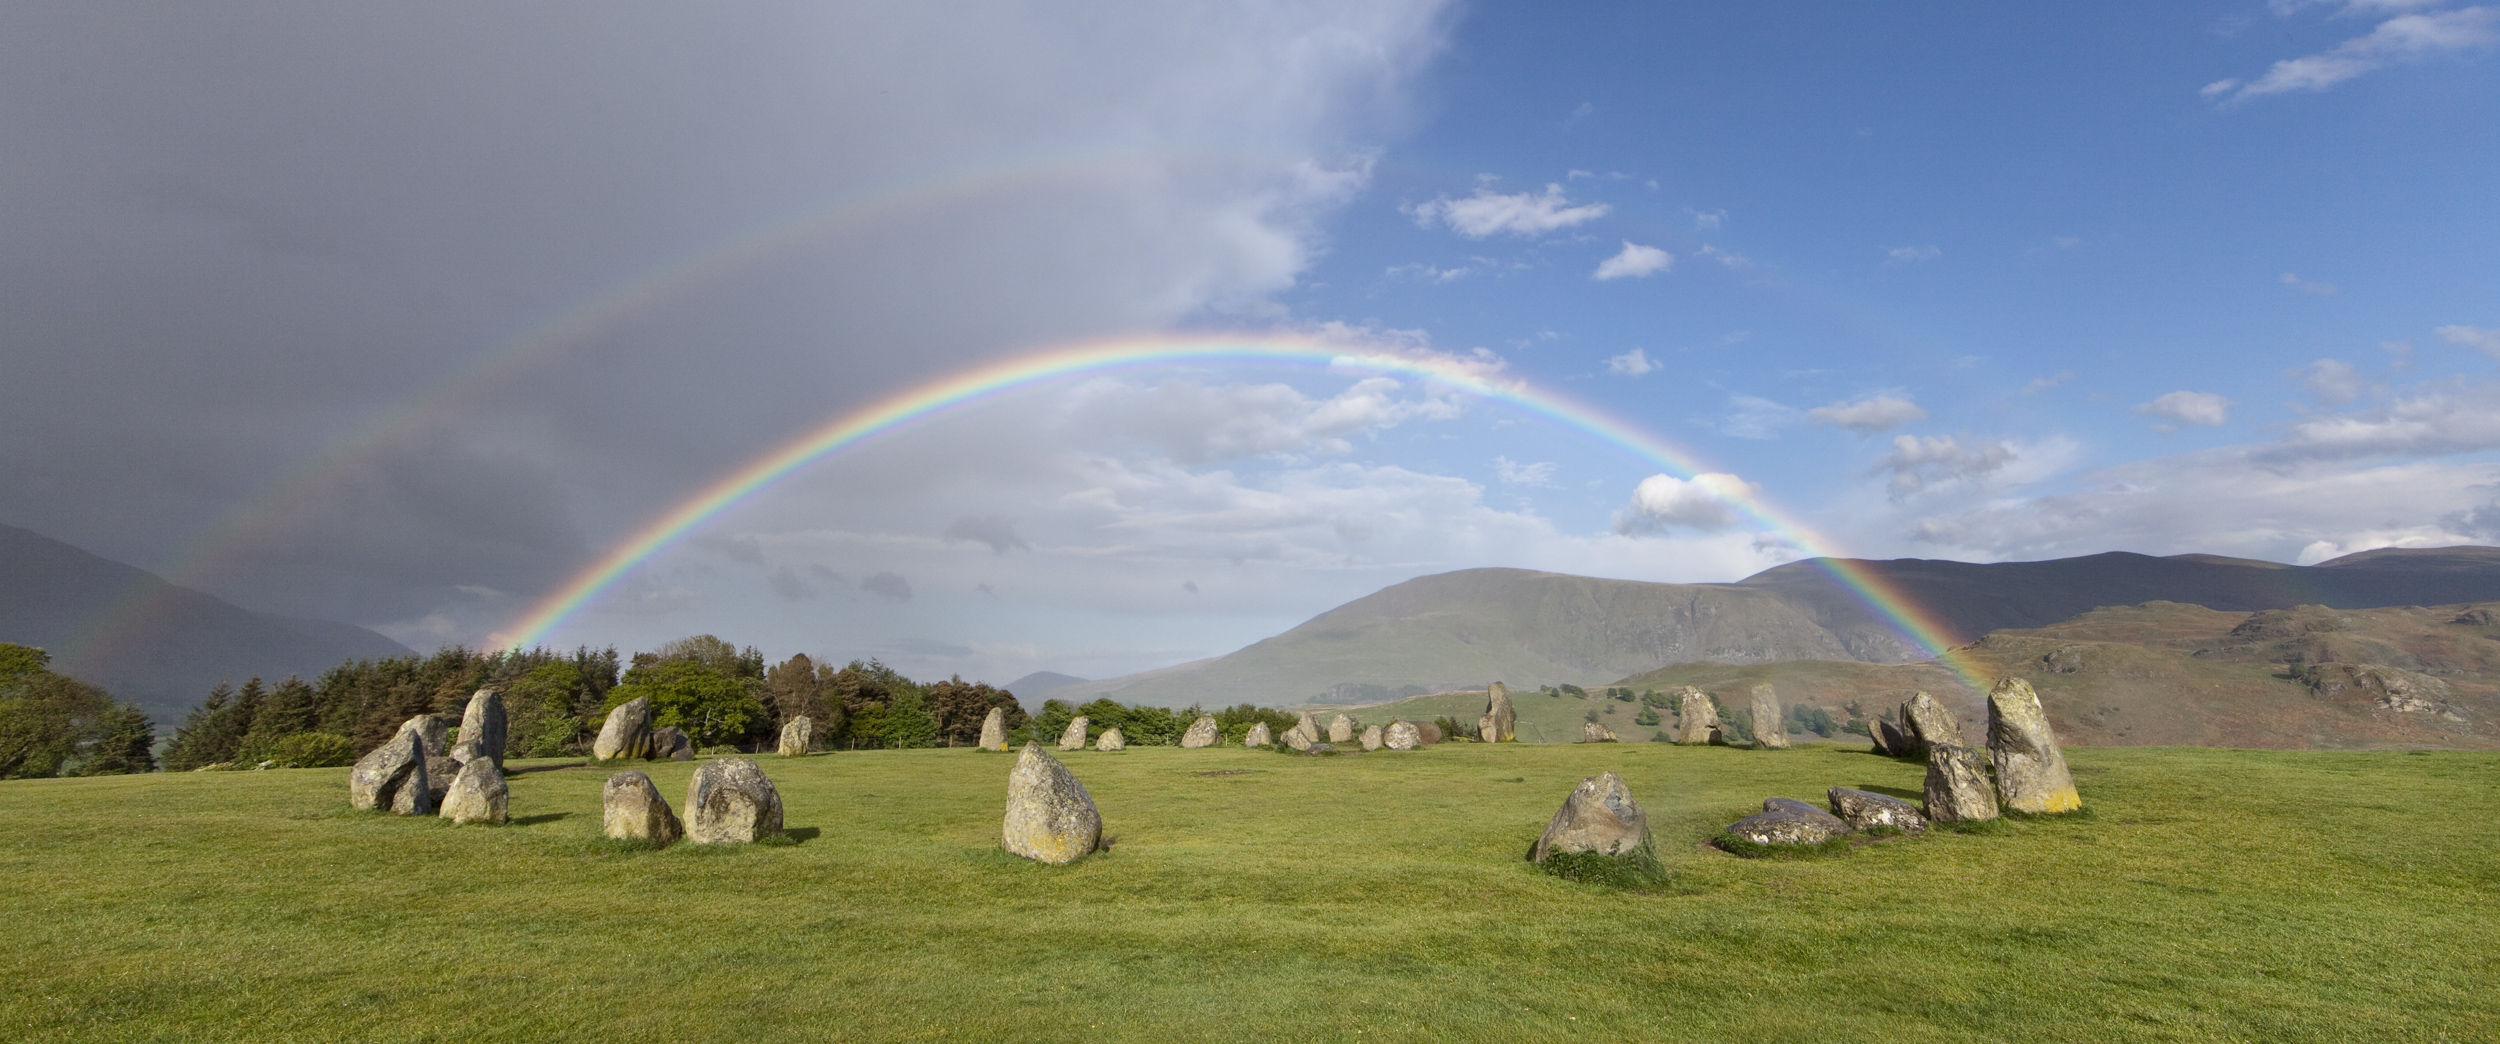 Just after a heavy shower, rainbow at Castlerigg Stone Circle, Keswick